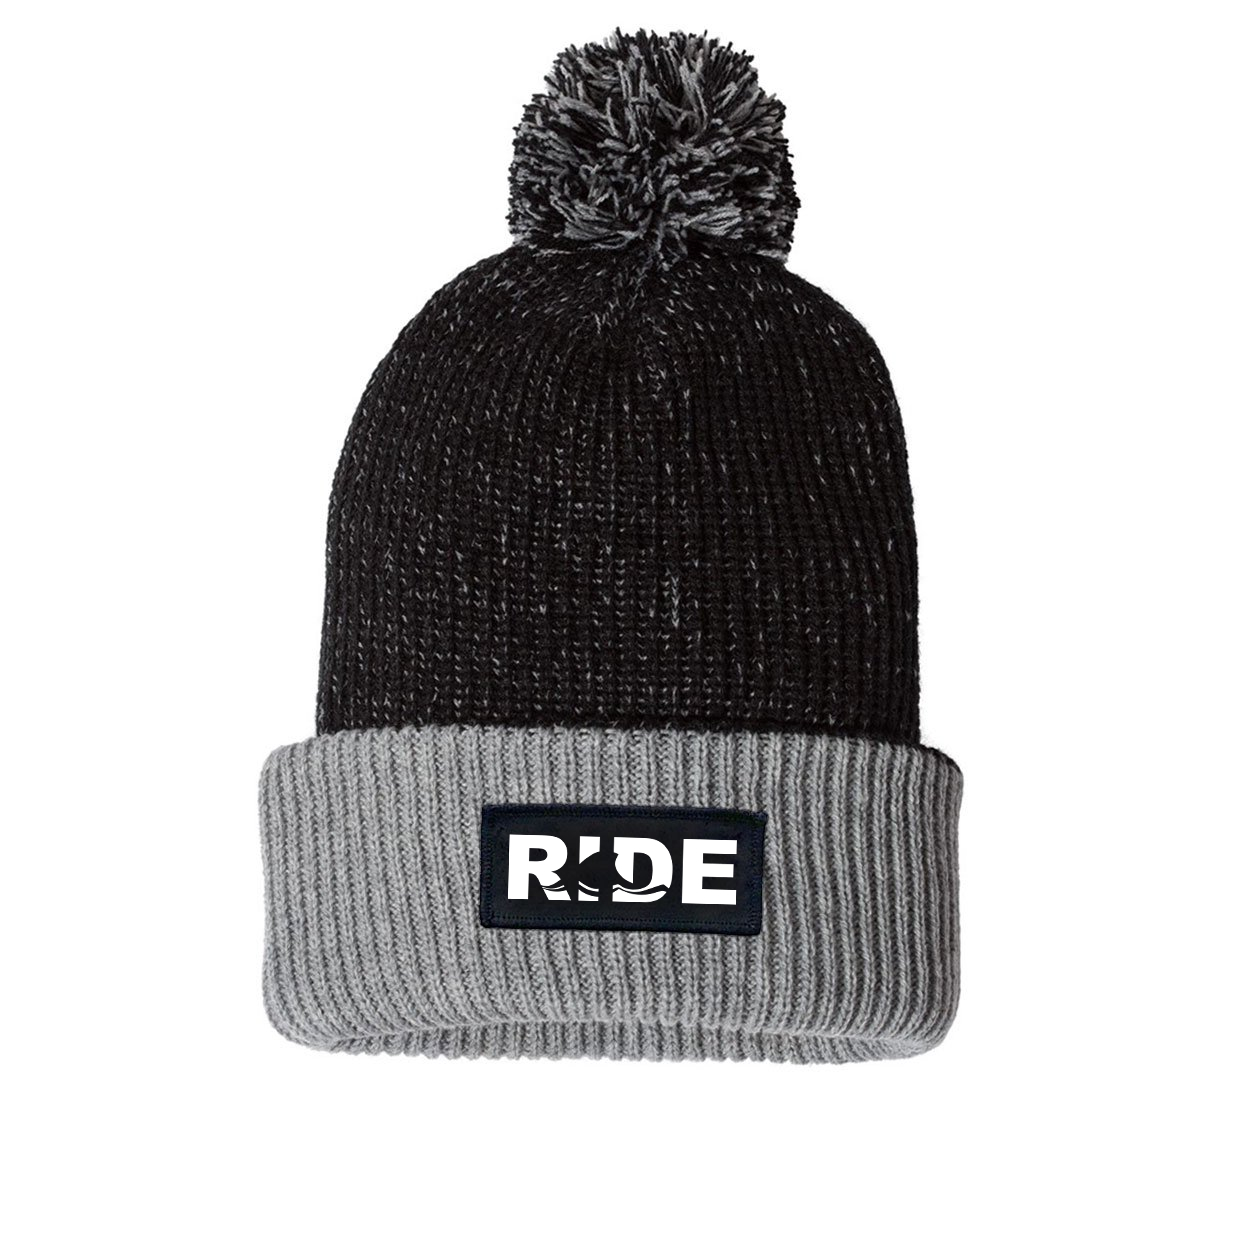 Ride Wave Logo Night Out Woven Patch Roll Up Pom Knit Beanie Black/Gray (White Logo)